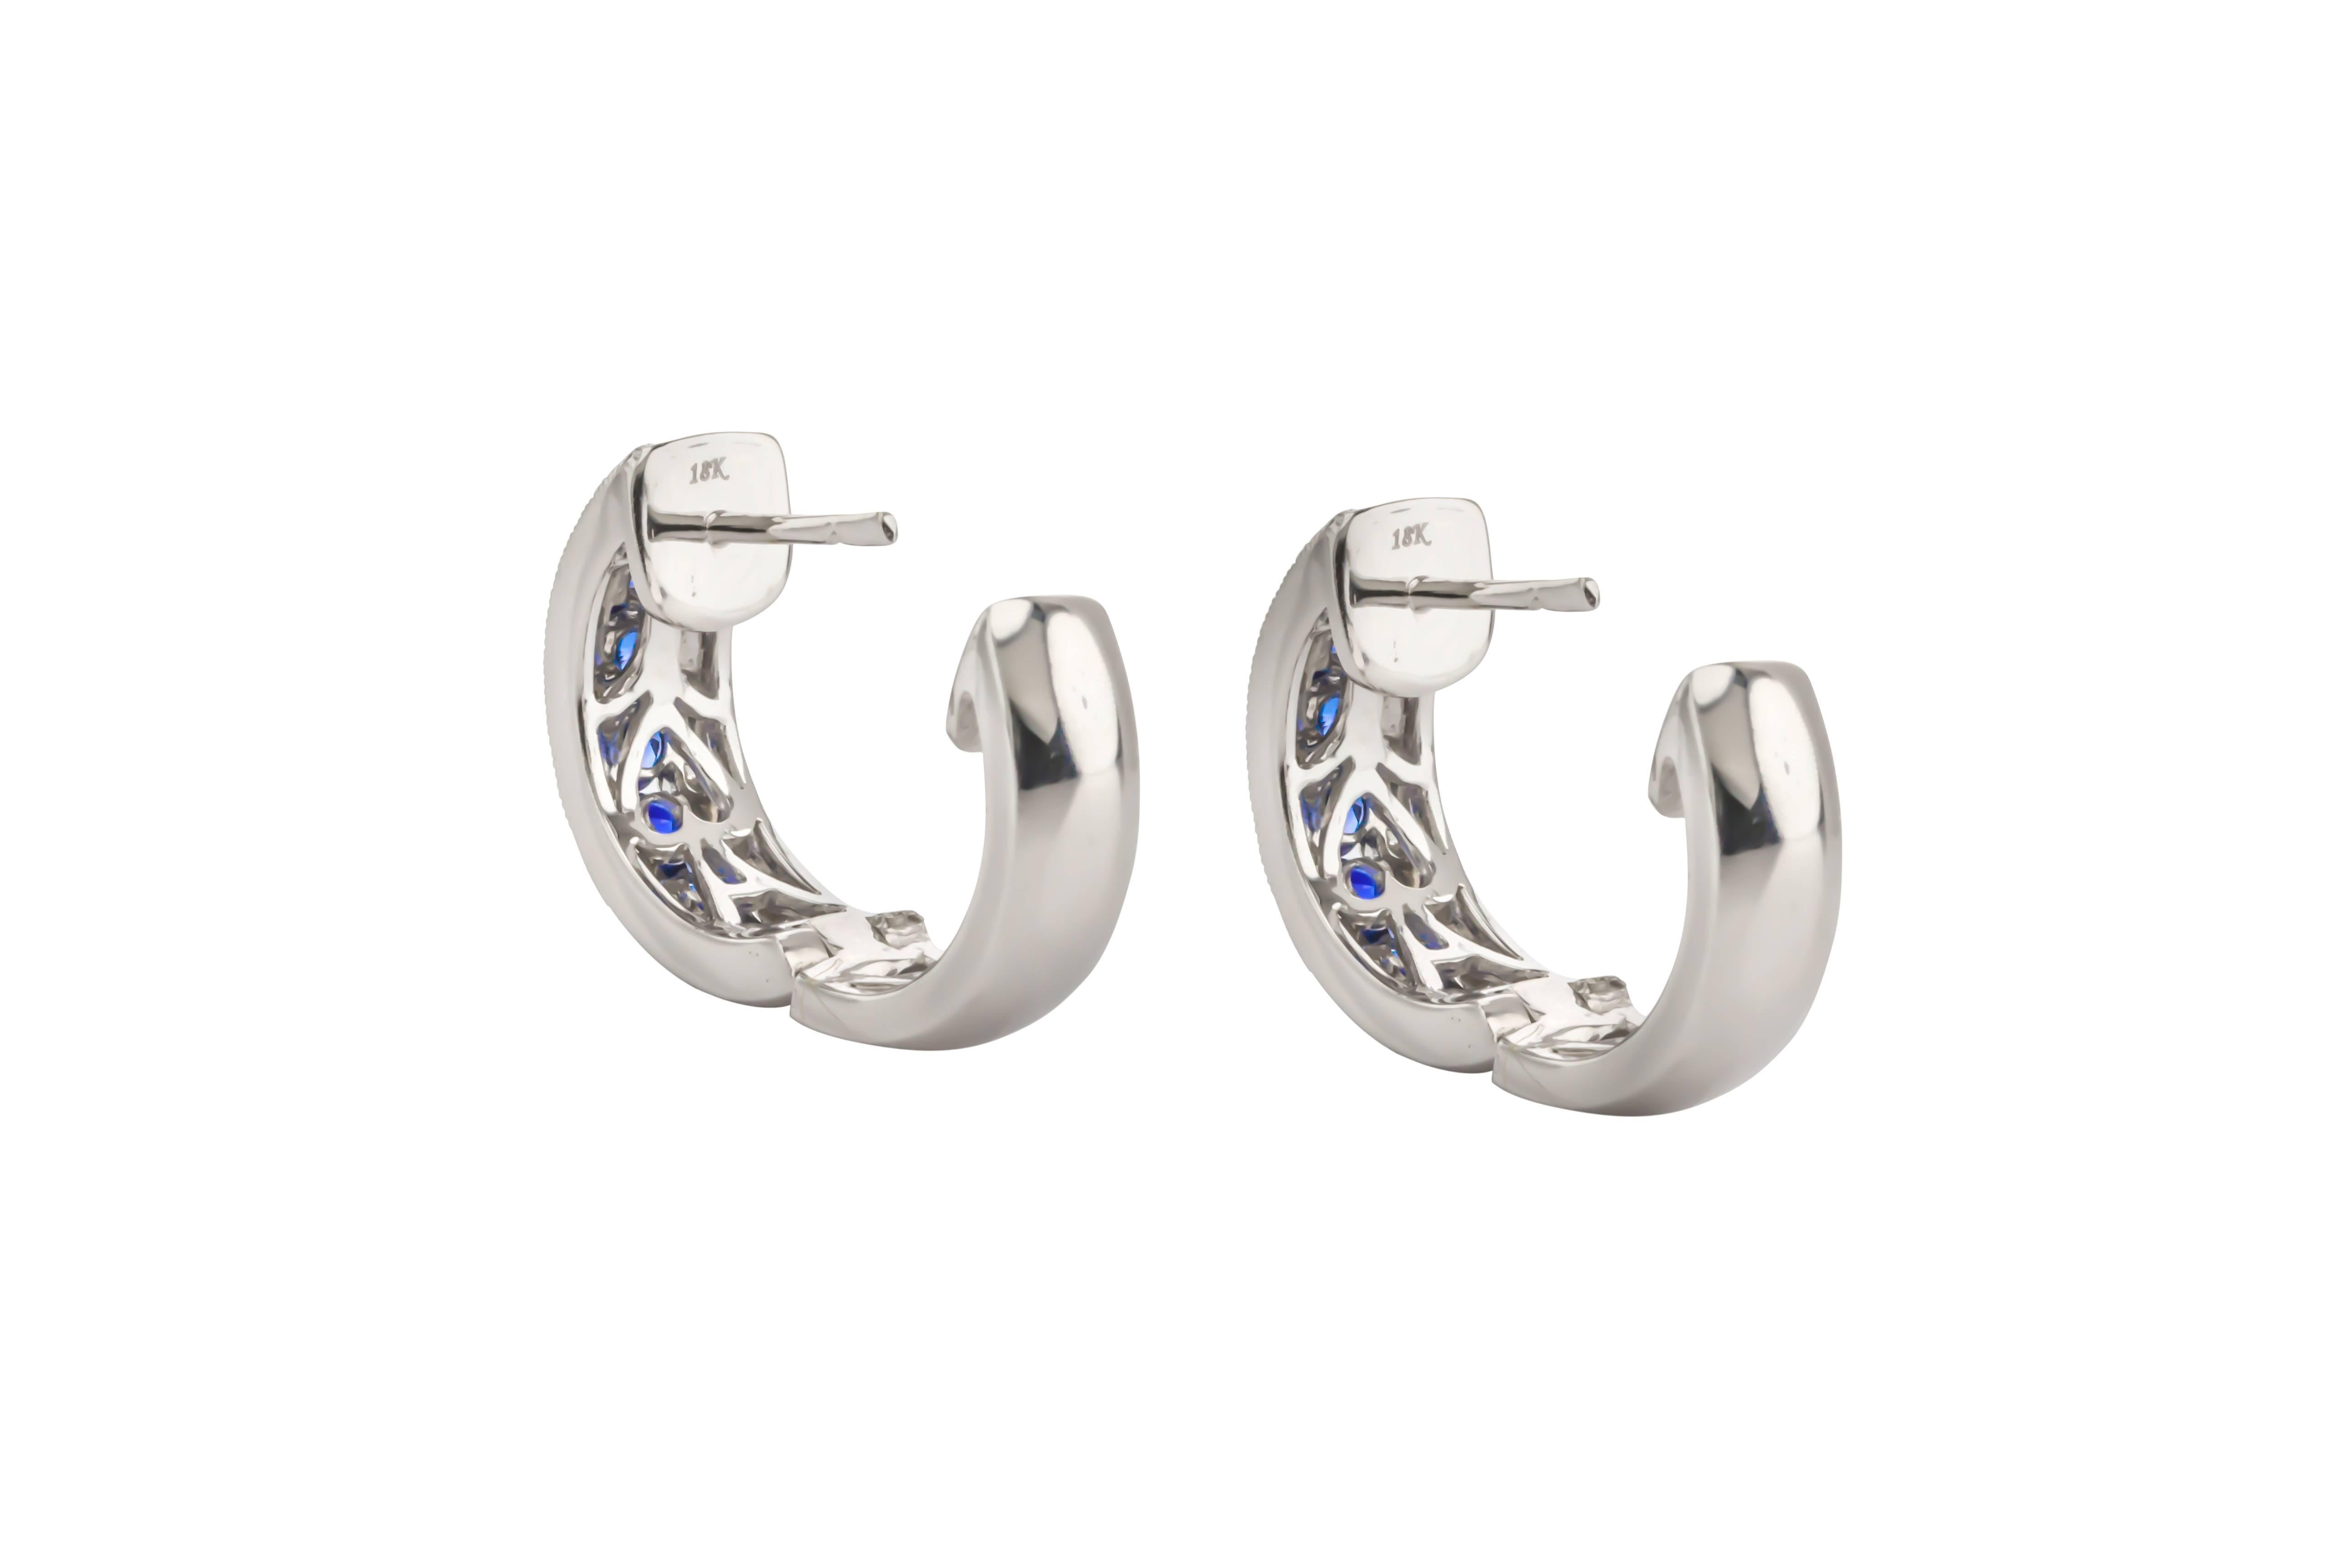 18K white gold blue sapphire and diamond hoop earrings. Set with blue sapphires weighing 1.68 carats total weight of fine color and clarity, surrounded in a scalloped design of round brilliant cut diamonds weighing .18 carats total weight, F-G color